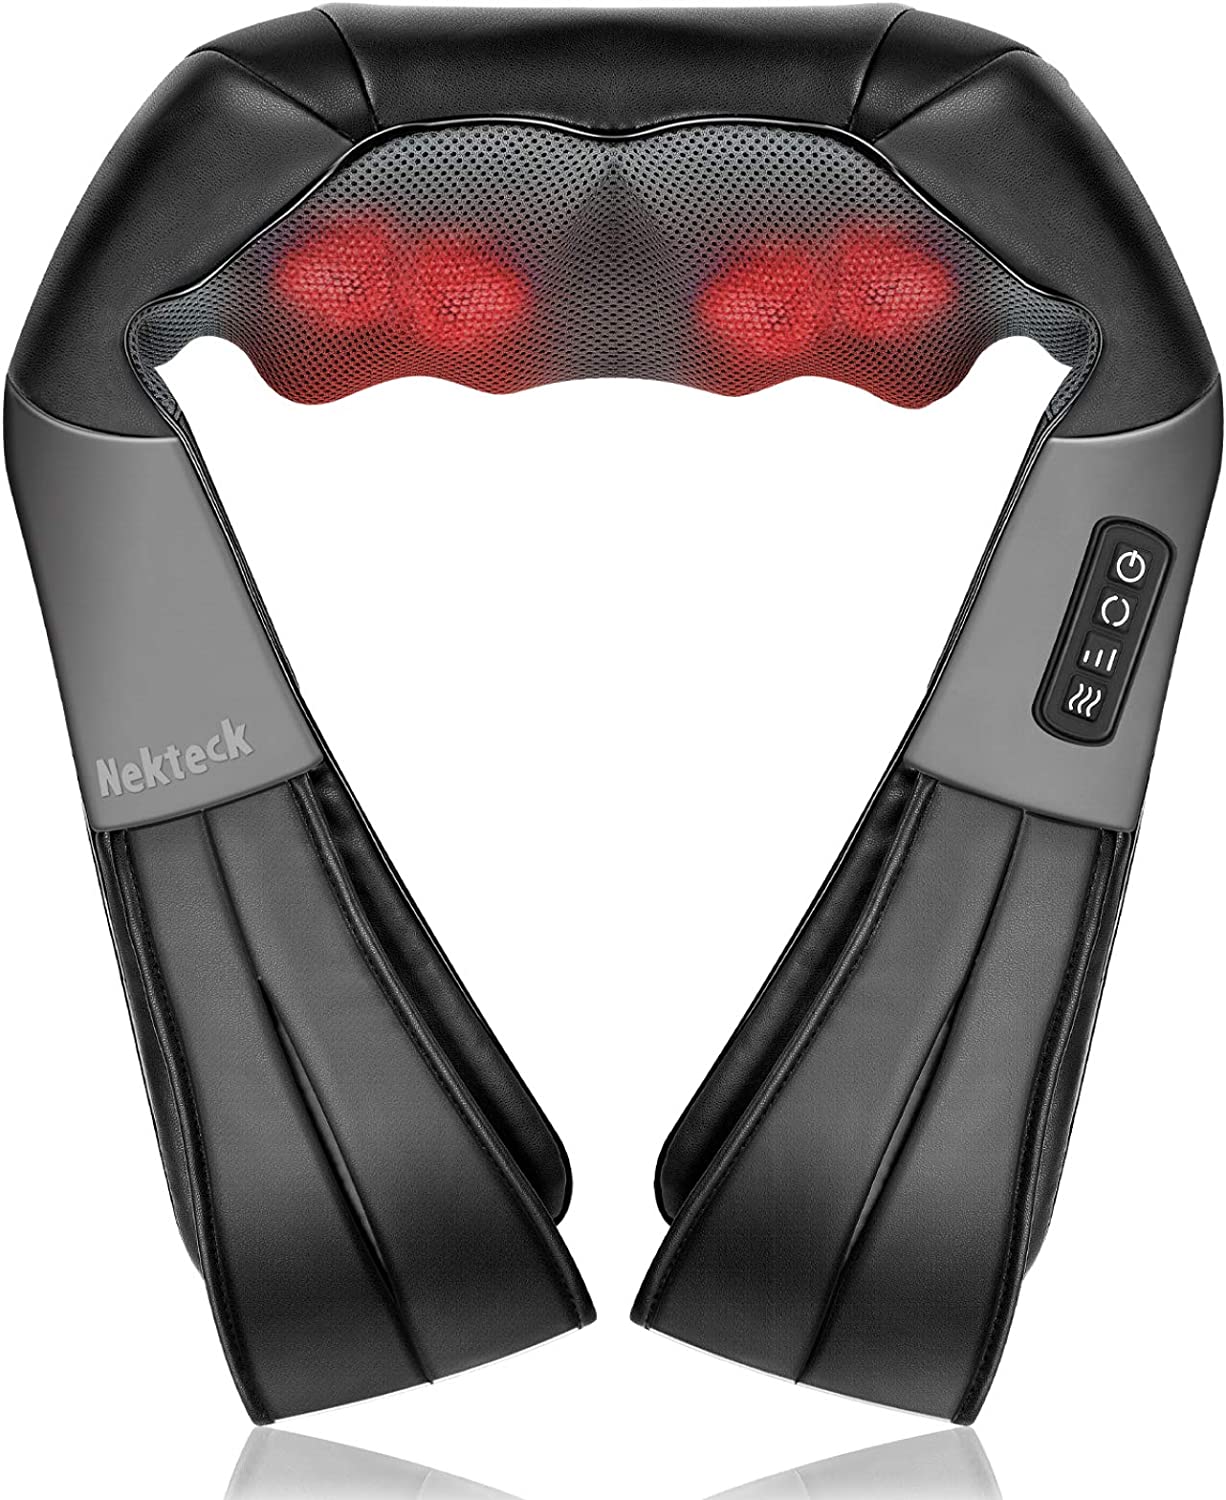 A black Nekteck Shiatsu Heated Electric Neck and Back Massager with red heated kneading massage nodes and four black side buttons